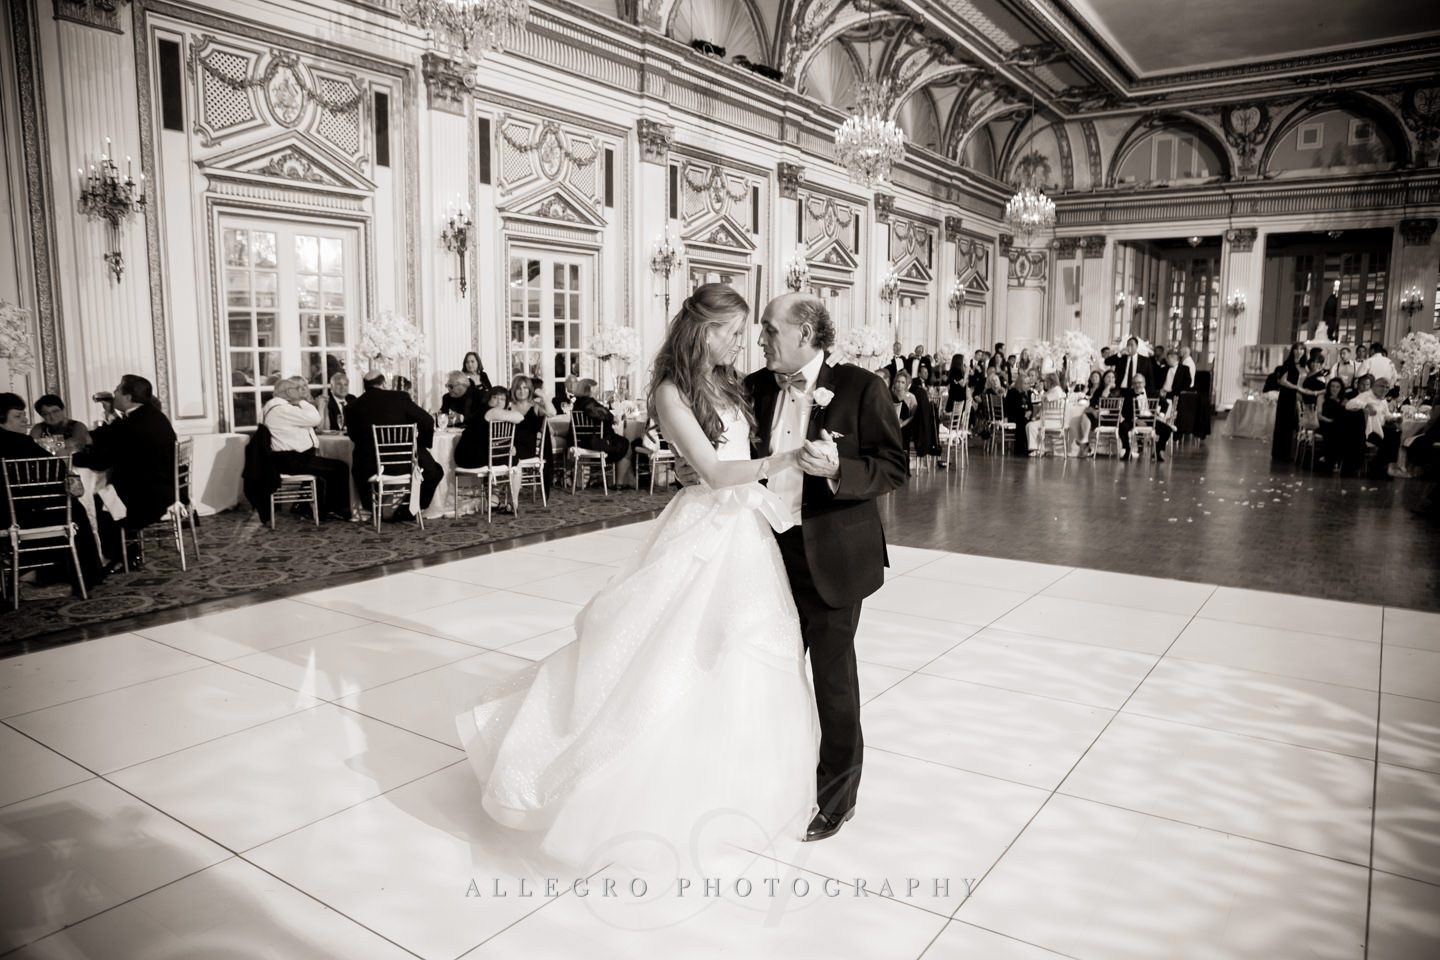 father daughter dance- photo by allegro photography